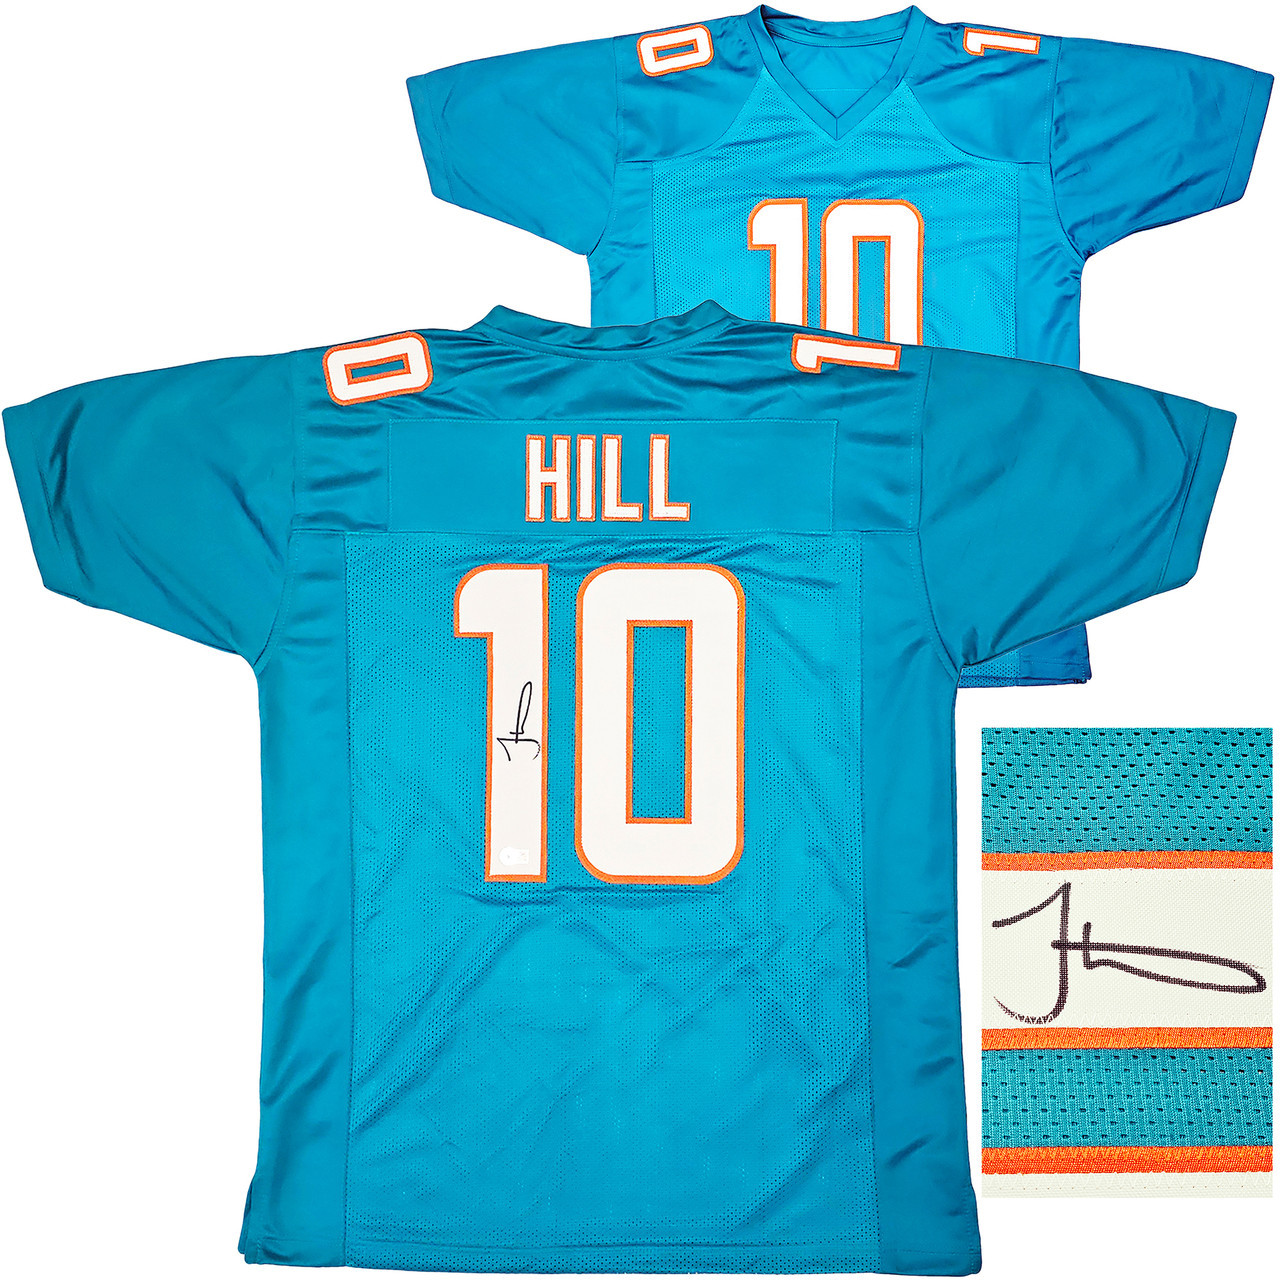 Tyreek Hill Autographed Miami Dolphins (Teal #10) Deluxe Framed Jersey –  Palm Beach Autographs LLC